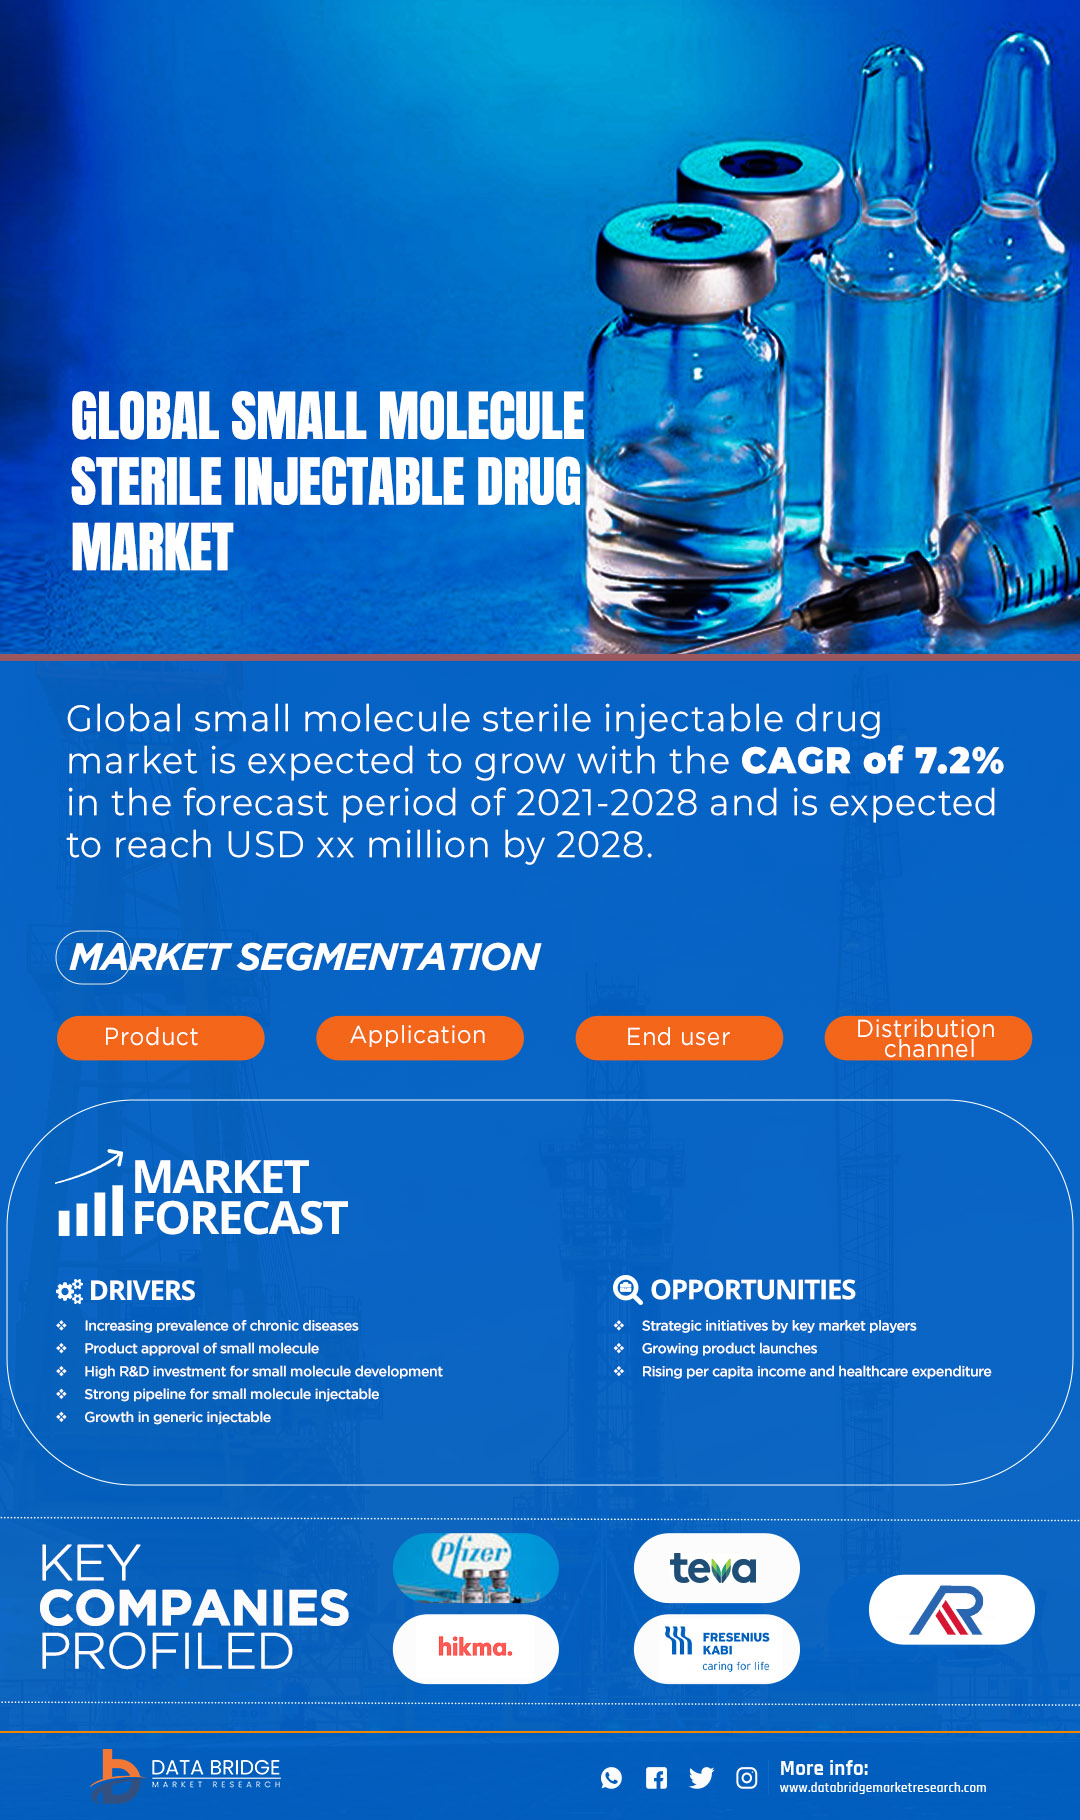 Small Molecule Sterile Injectable Drugs Market